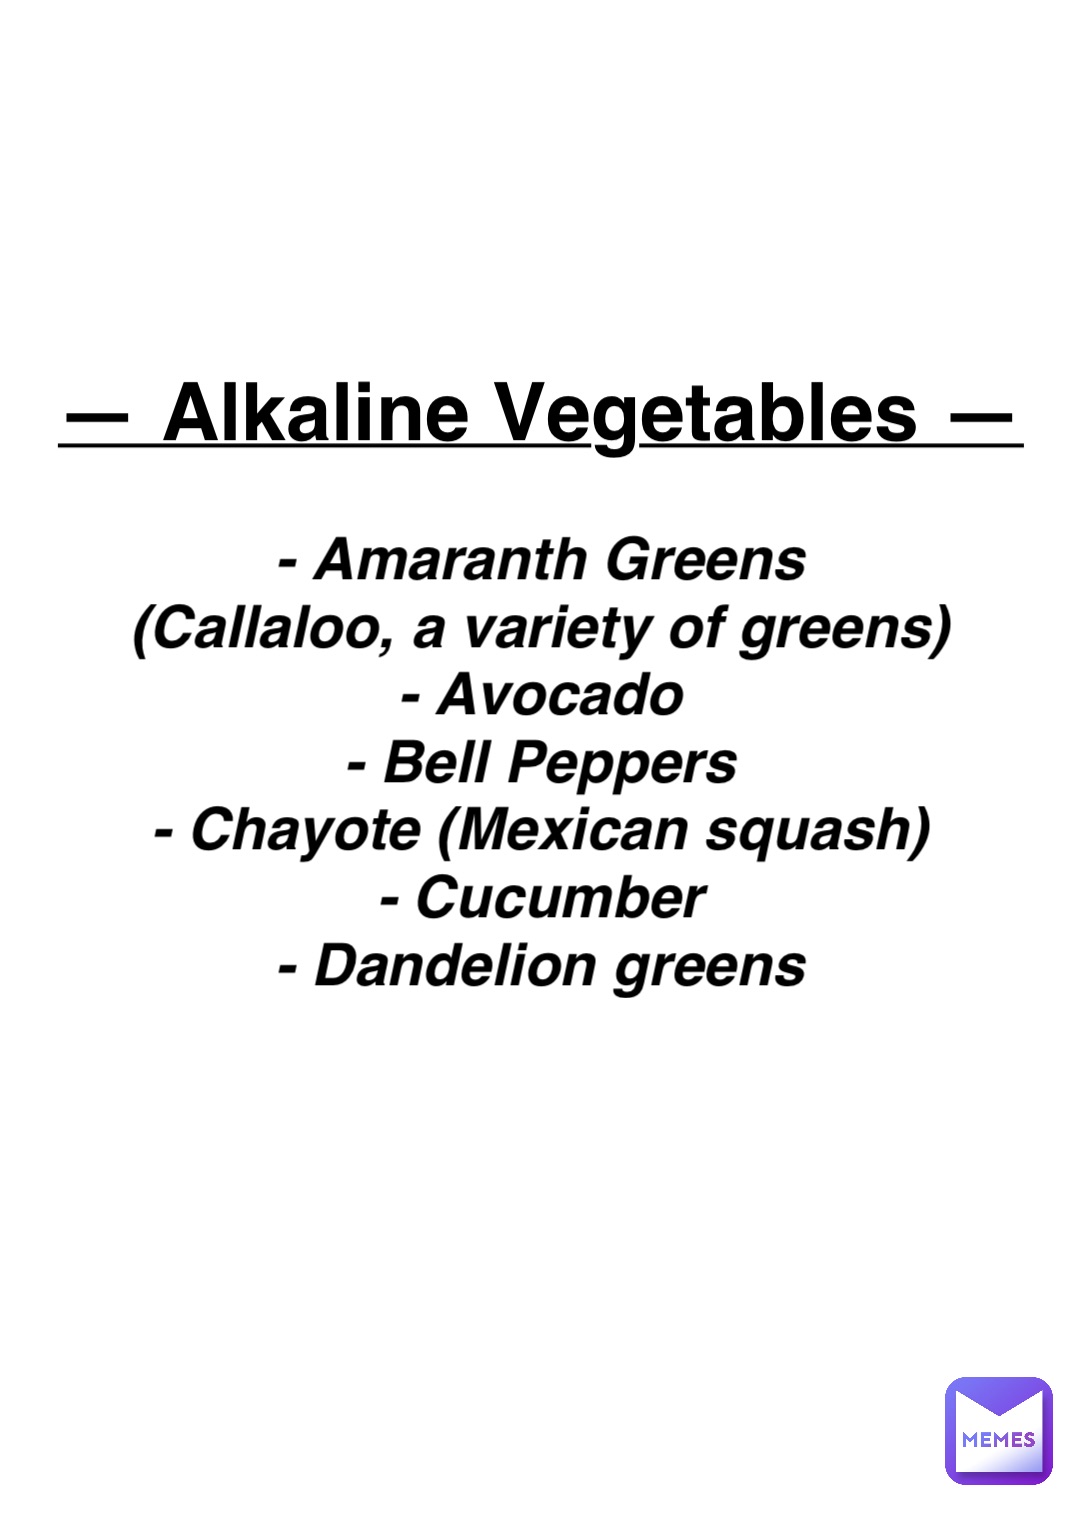 Double tap to edit — Alkaline Vegetables — - Amaranth Greens
(Callaloo, a variety of greens)
- Avocado
- Bell Peppers
- Chayote (Mexican squash)
- Cucumber
- Dandelion greens